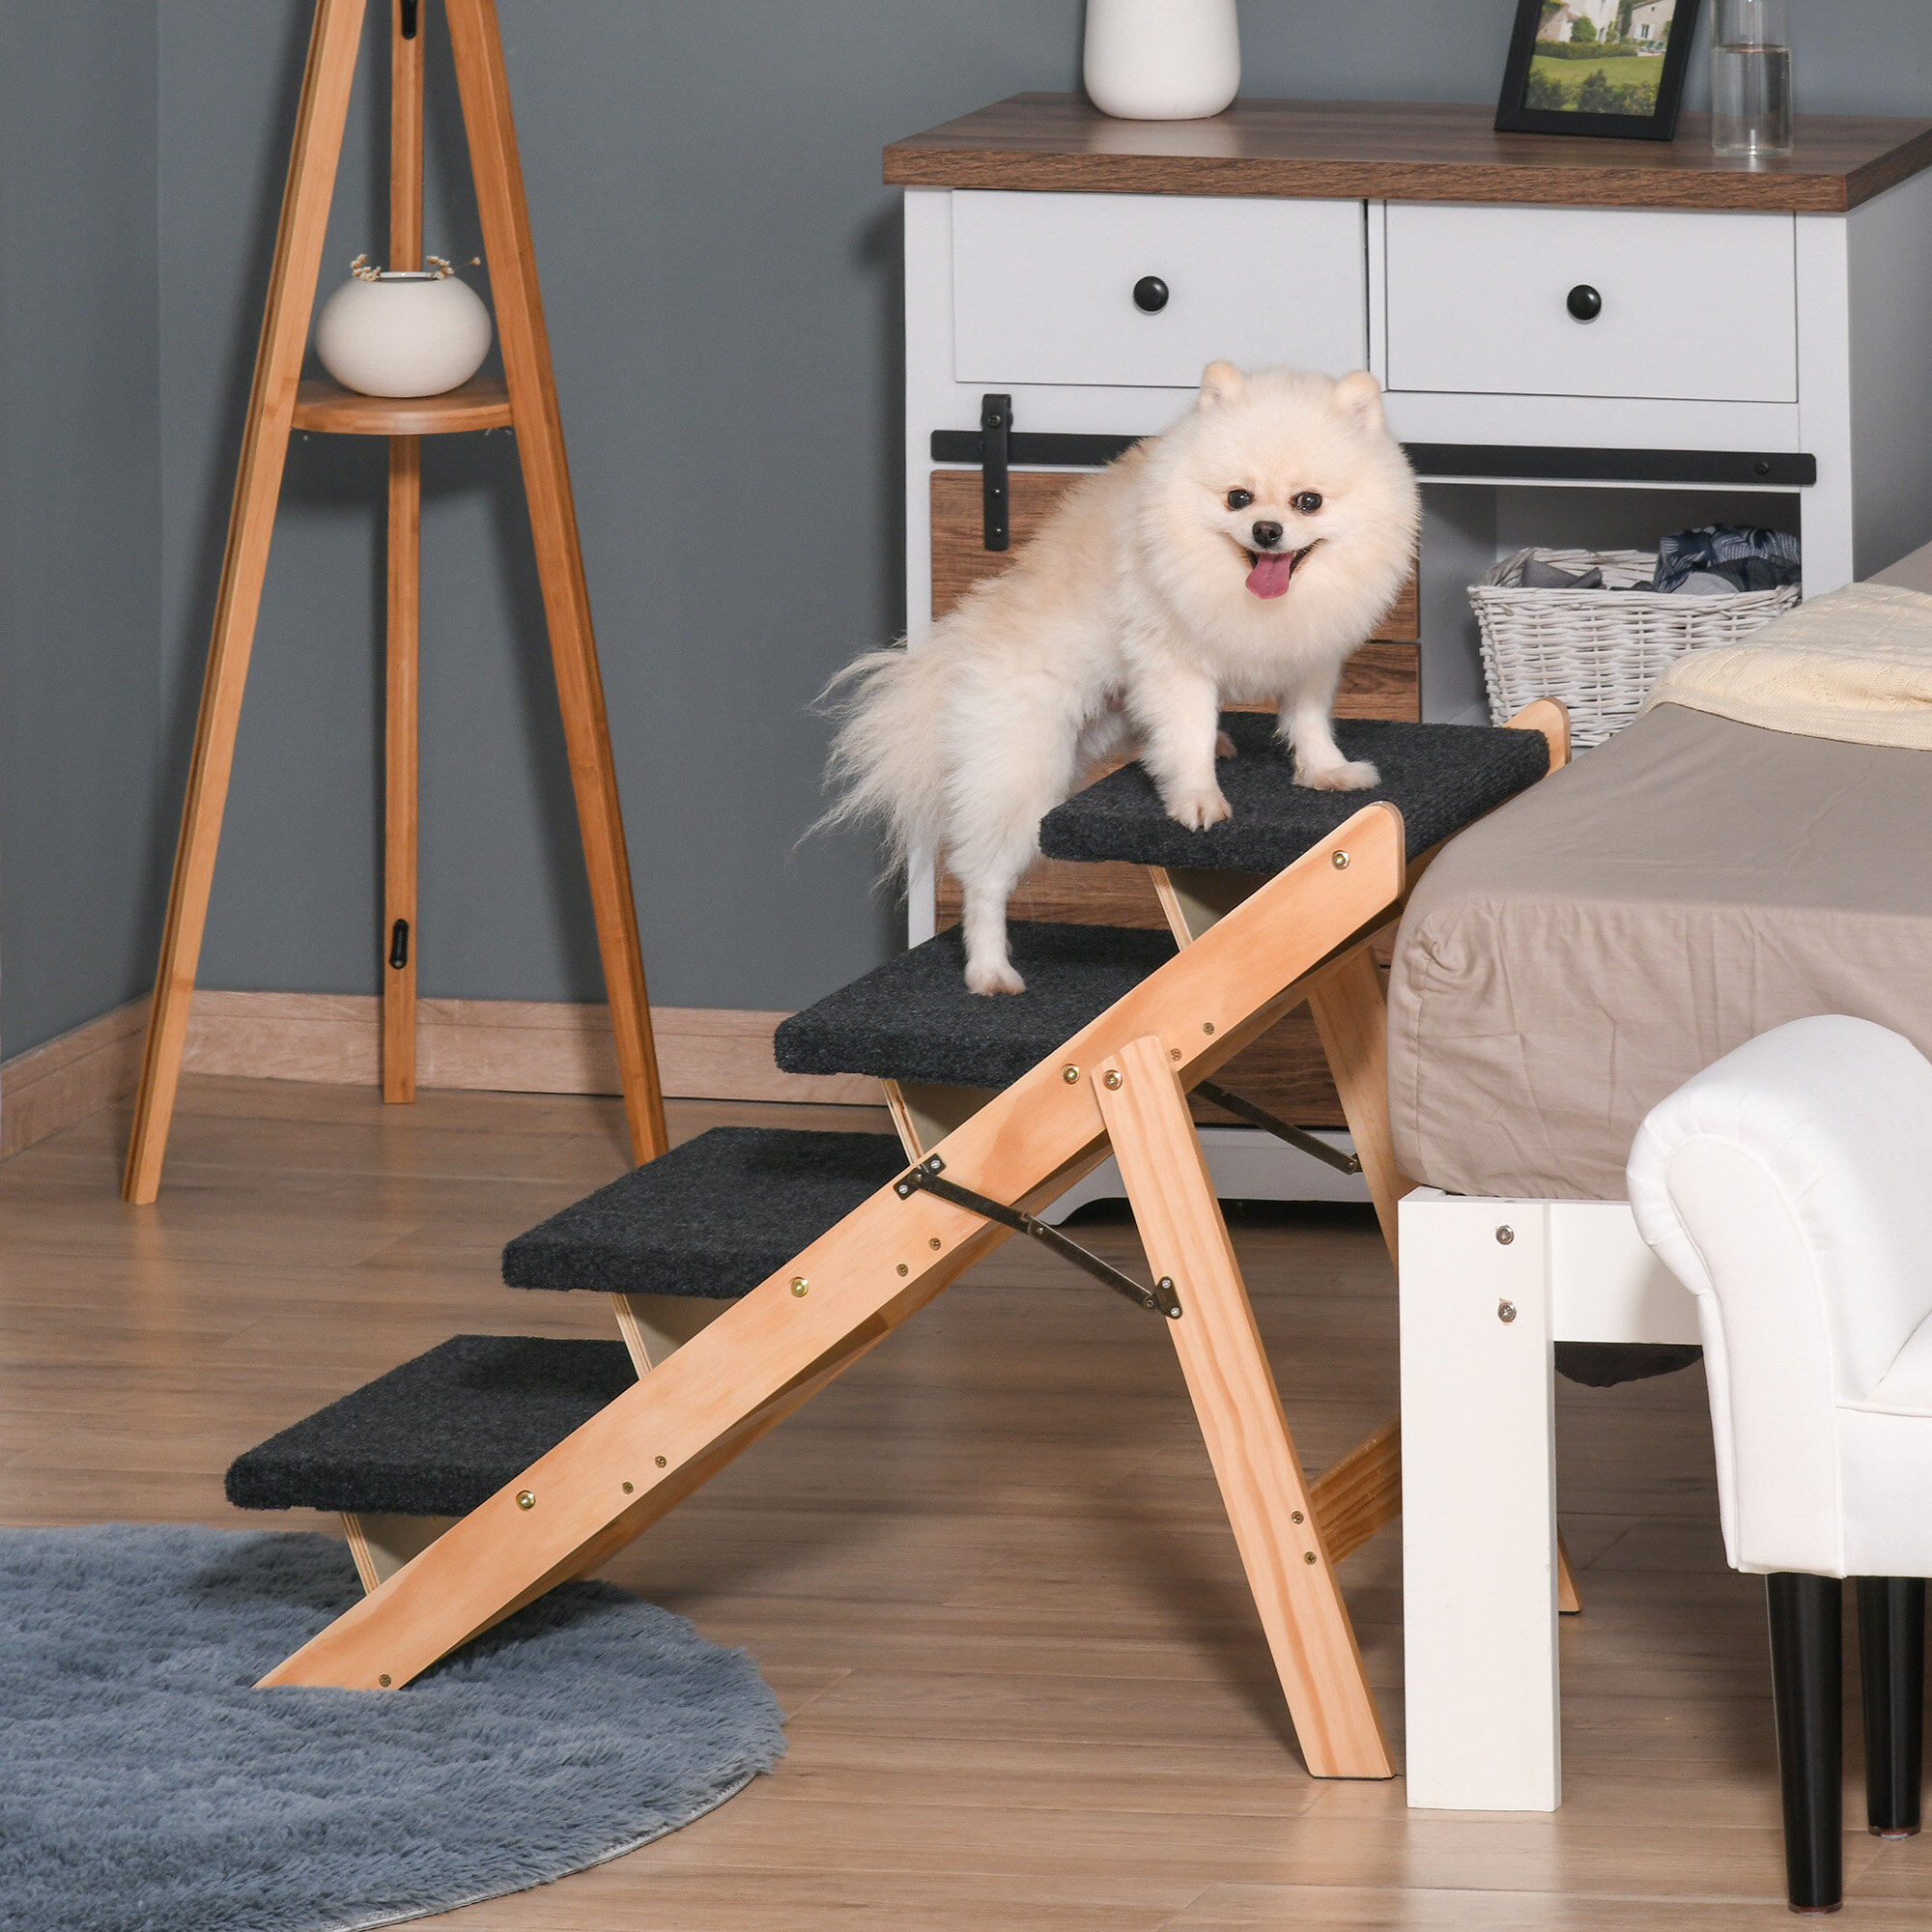 LNGG 2 Levels Easy to fold Multi-Purpose Dog and Cat Stairs/Pet Stairs 